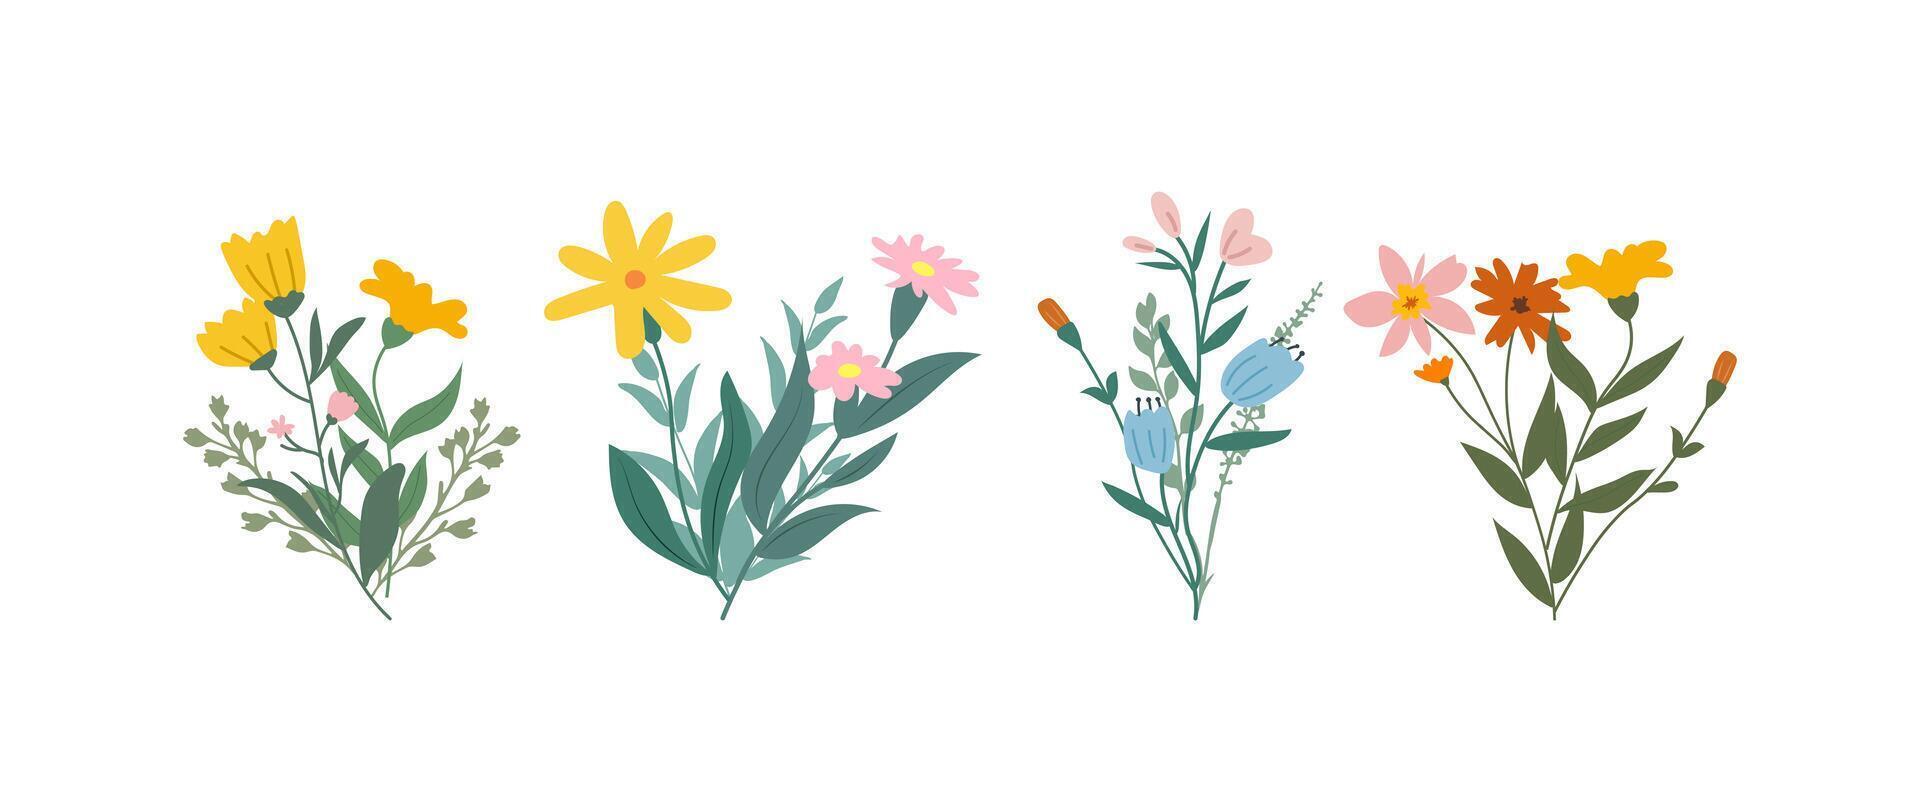 A collection of colorful spring flowers in soft colors, botanical species in flat design style, nature floral bloom decorative elements illustration vector